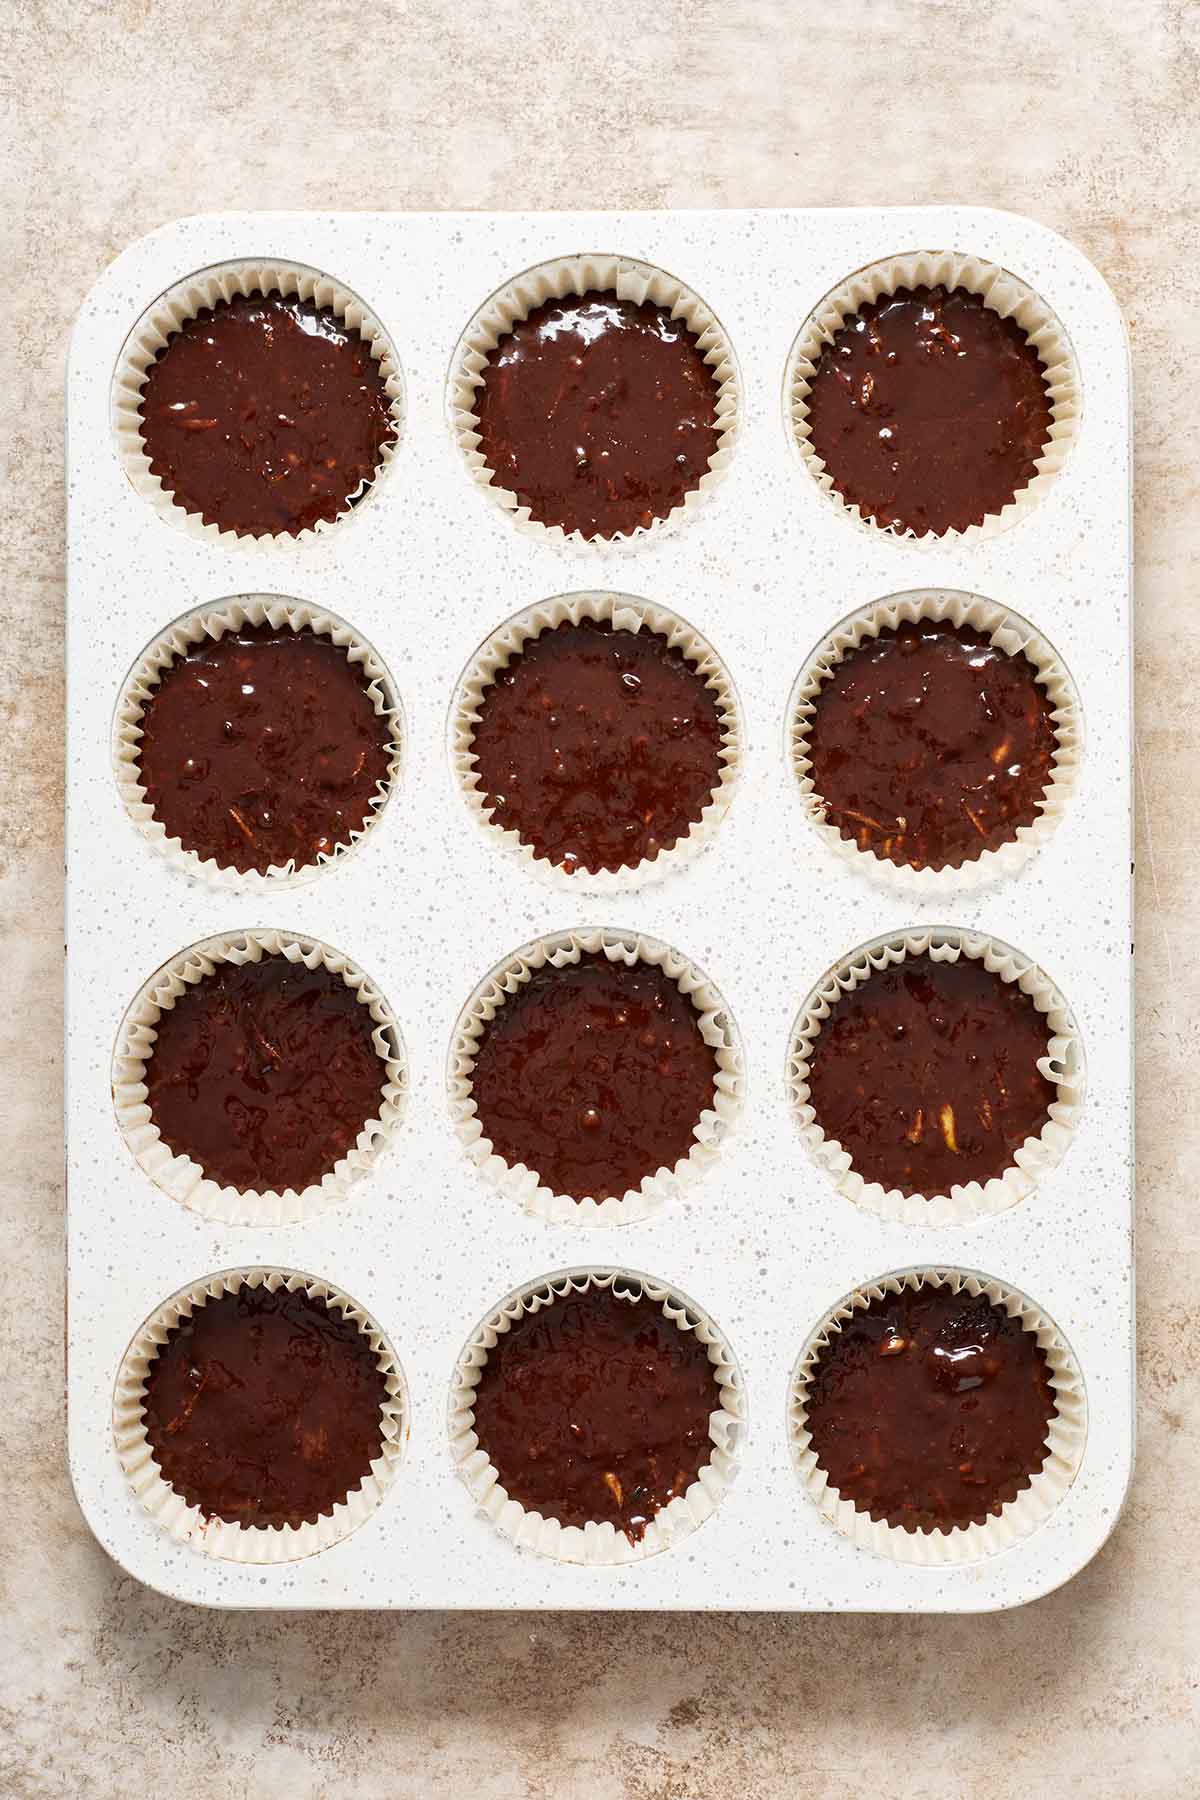 Cupcake batter divided into a muffin pan.